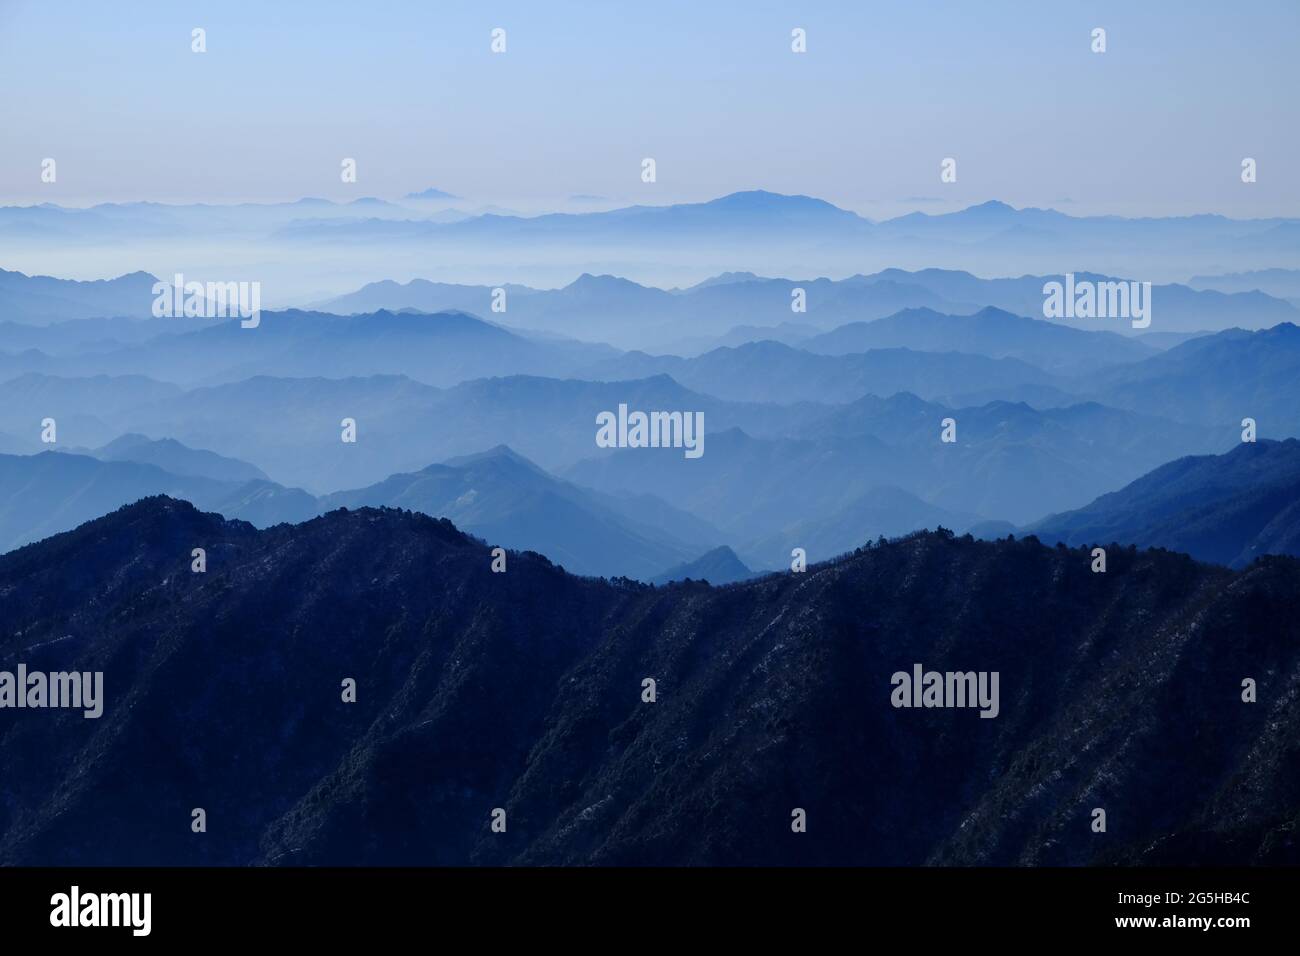 Mountain peaks rise one upon another in Mountain Huangshan (Yellow Mountain), Anhui, China. Stock Photo